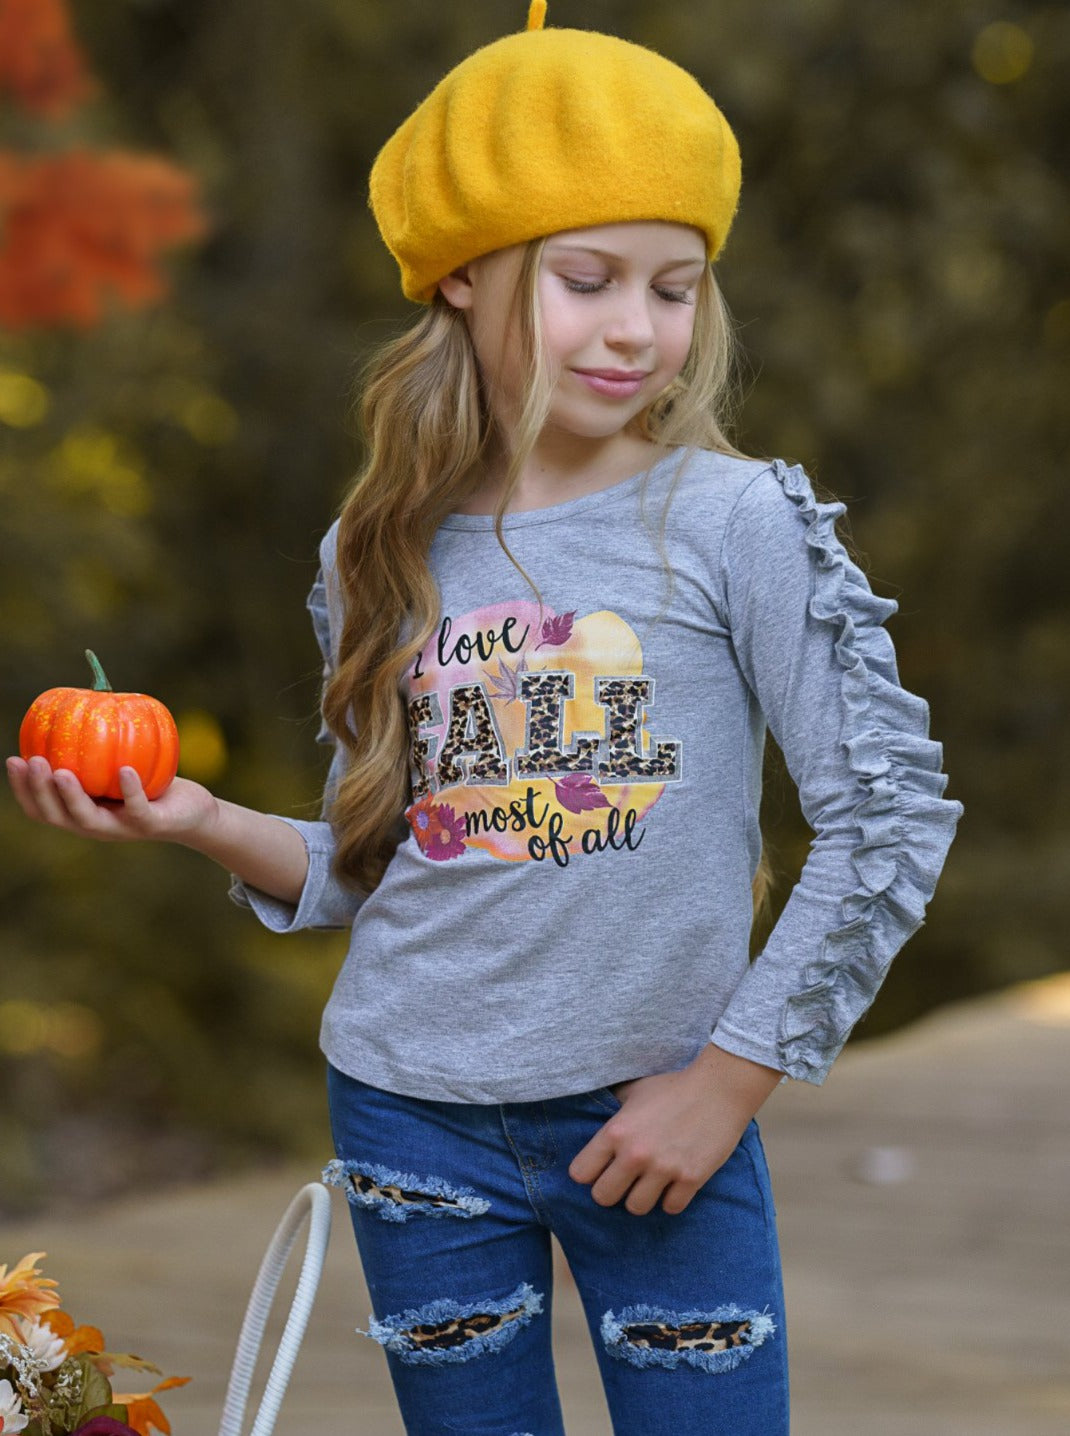 Girls Fall Outfits | Ruffle Top & Patched Jeans Set - Mia Belle Girls